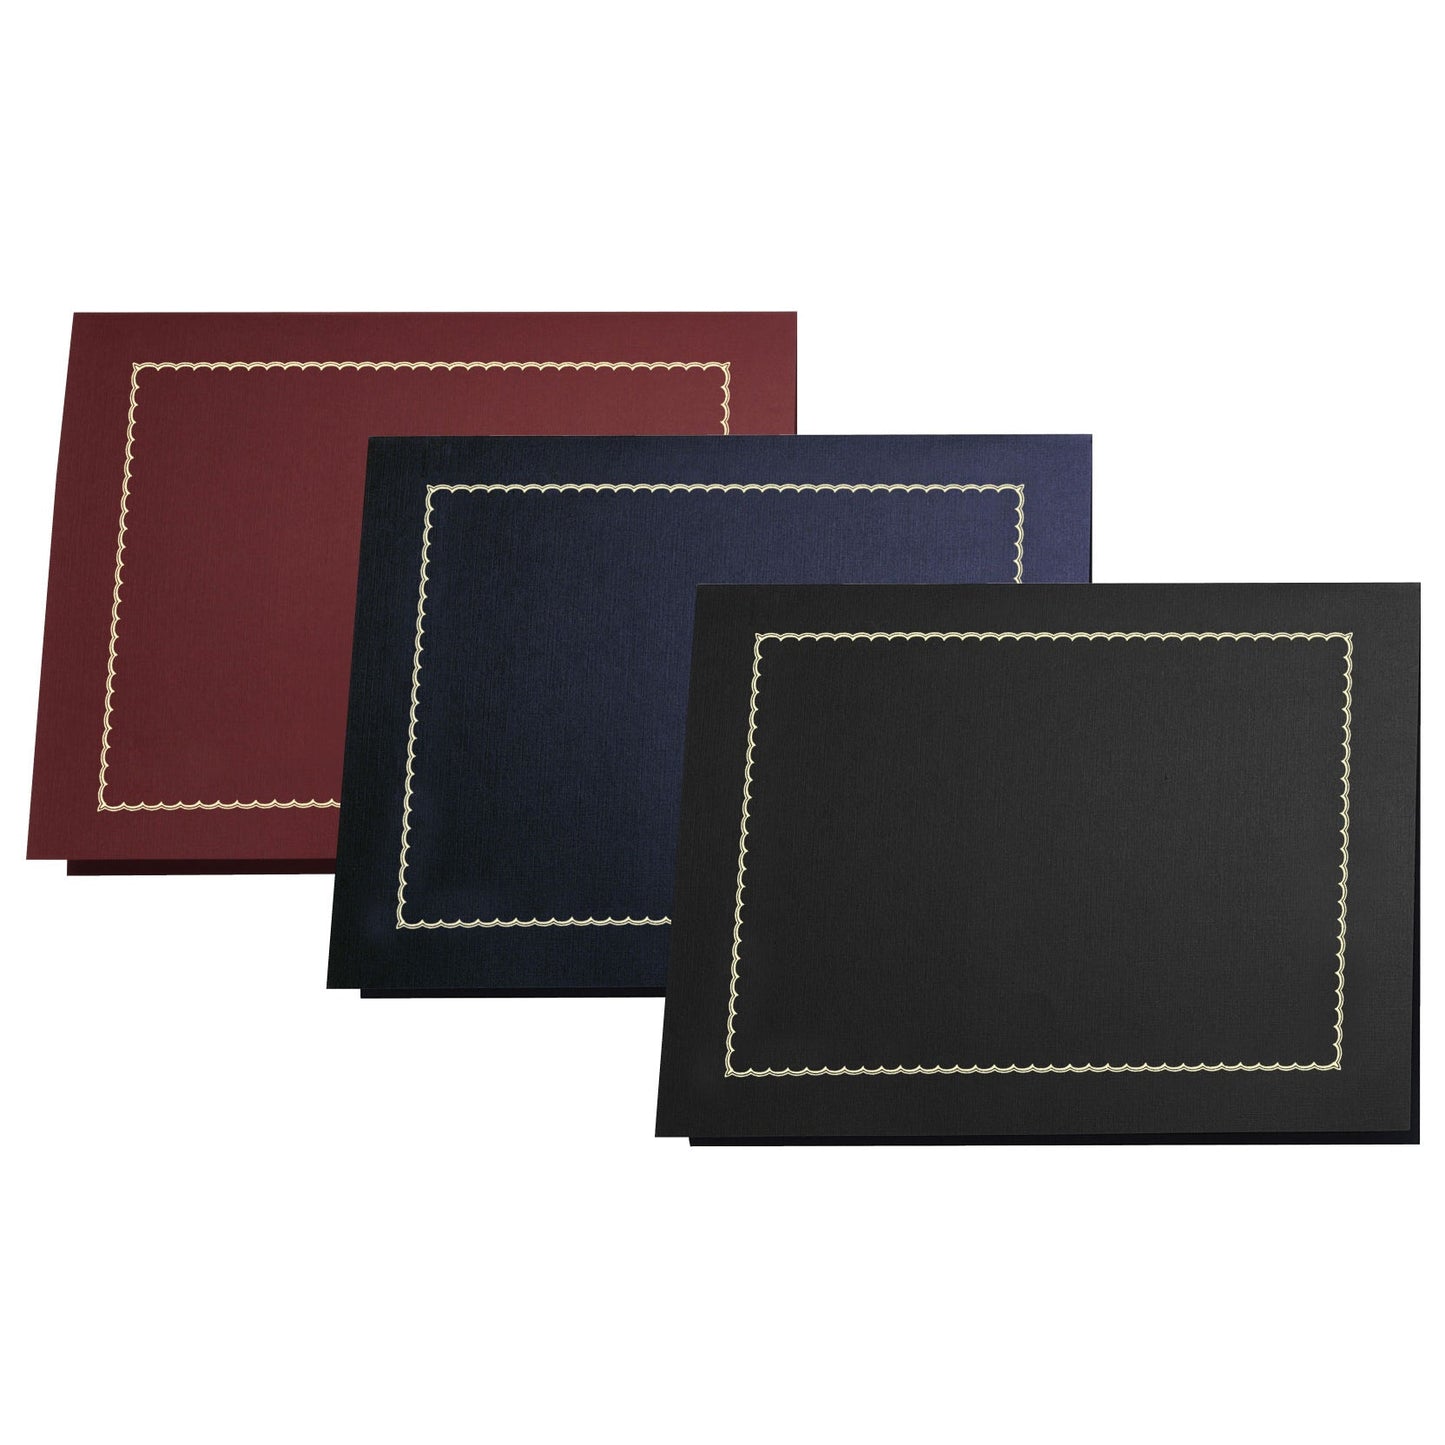 St. James® Classic Linen Certificate Holders with Gold Foil, Burgundy, Pack of 5